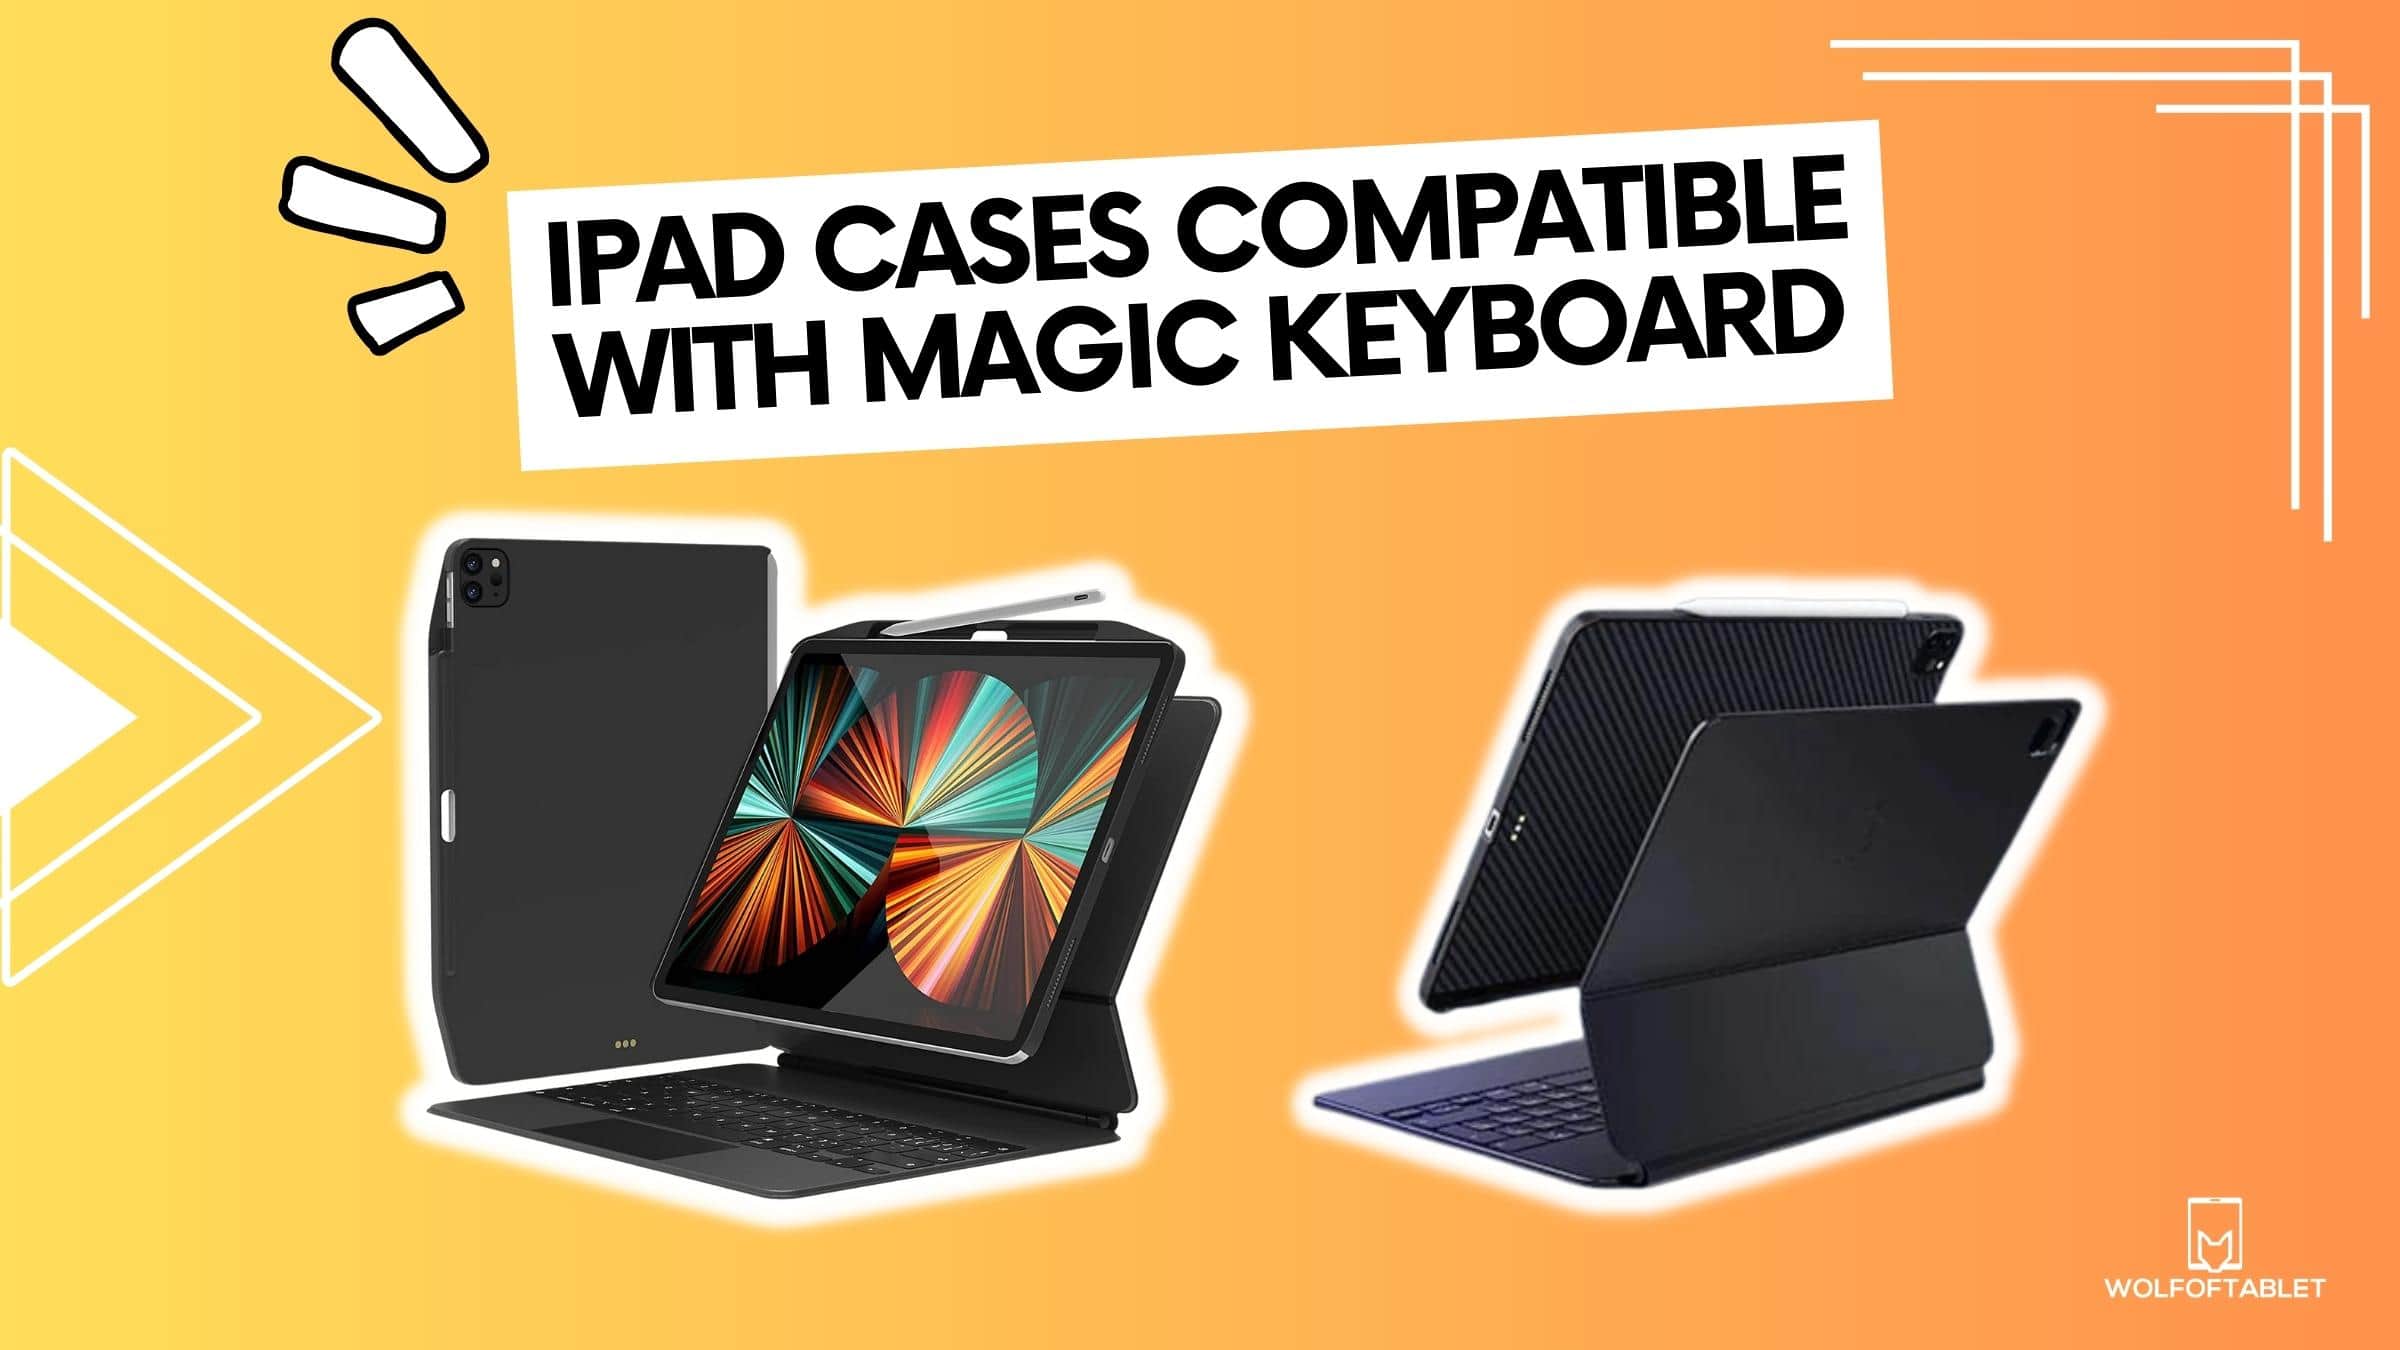 ipad cases compatible with magic keyboard - top list